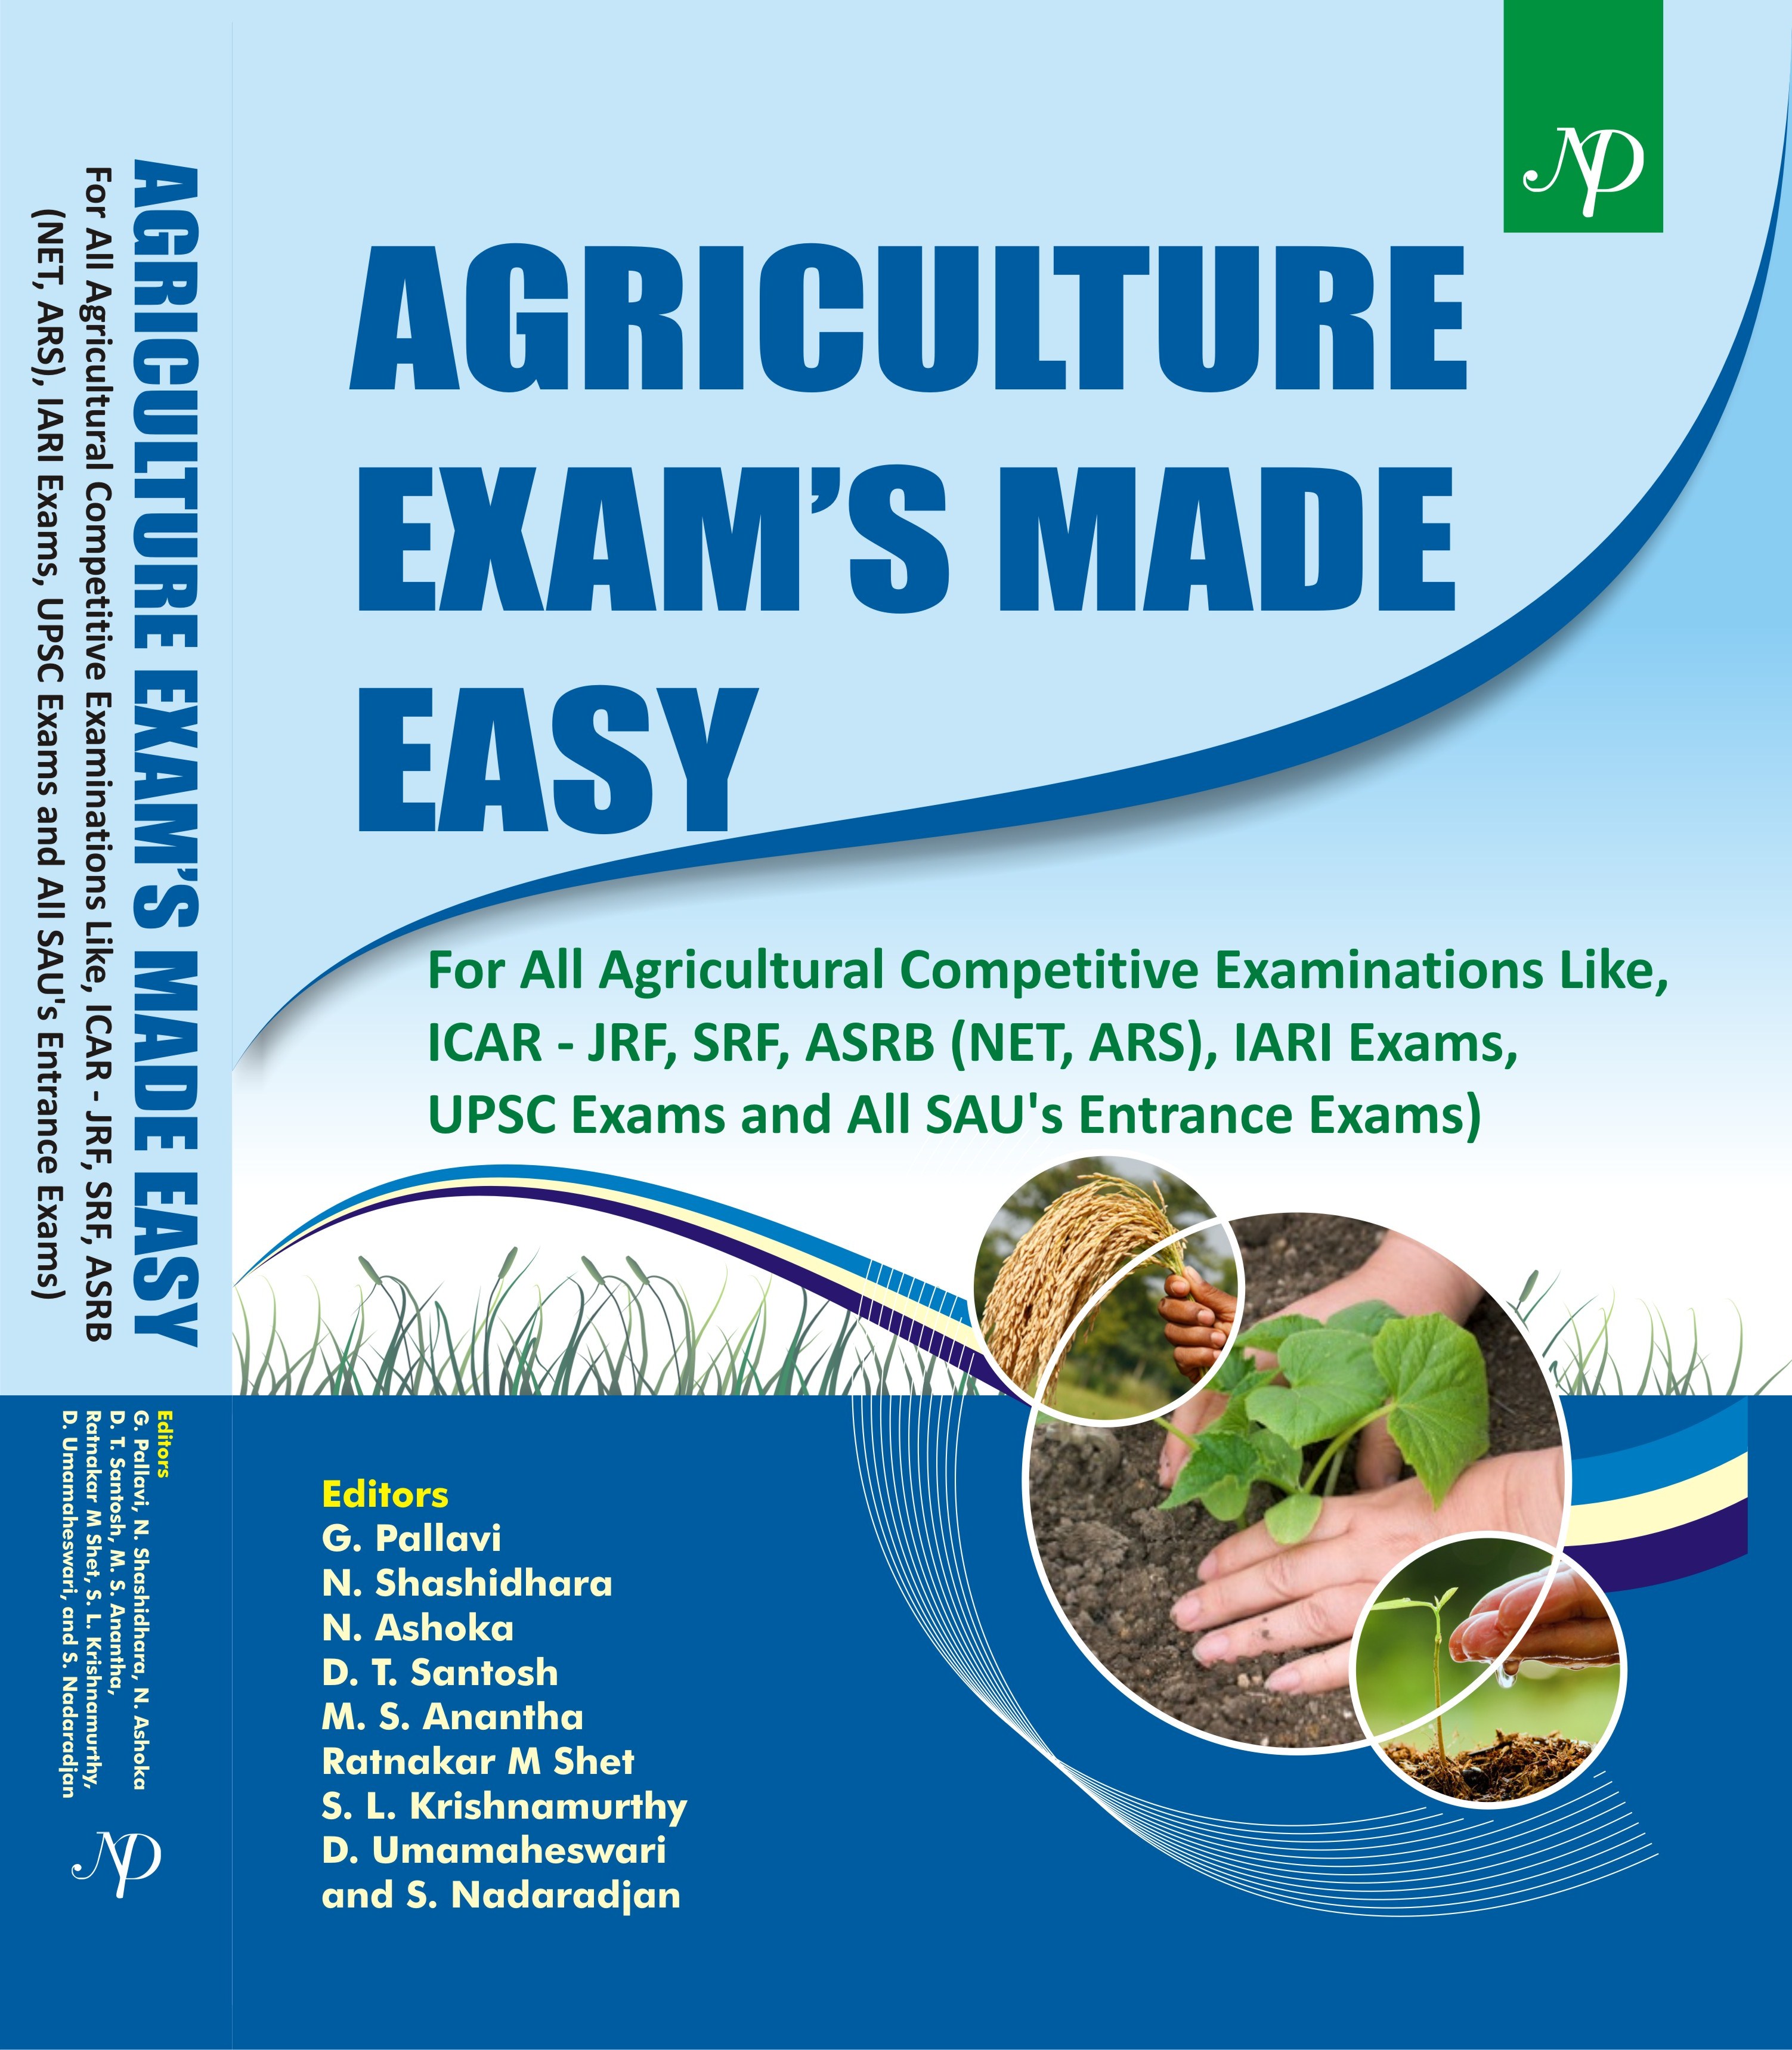 Agriculture Exam's made Easy final (1).jpg